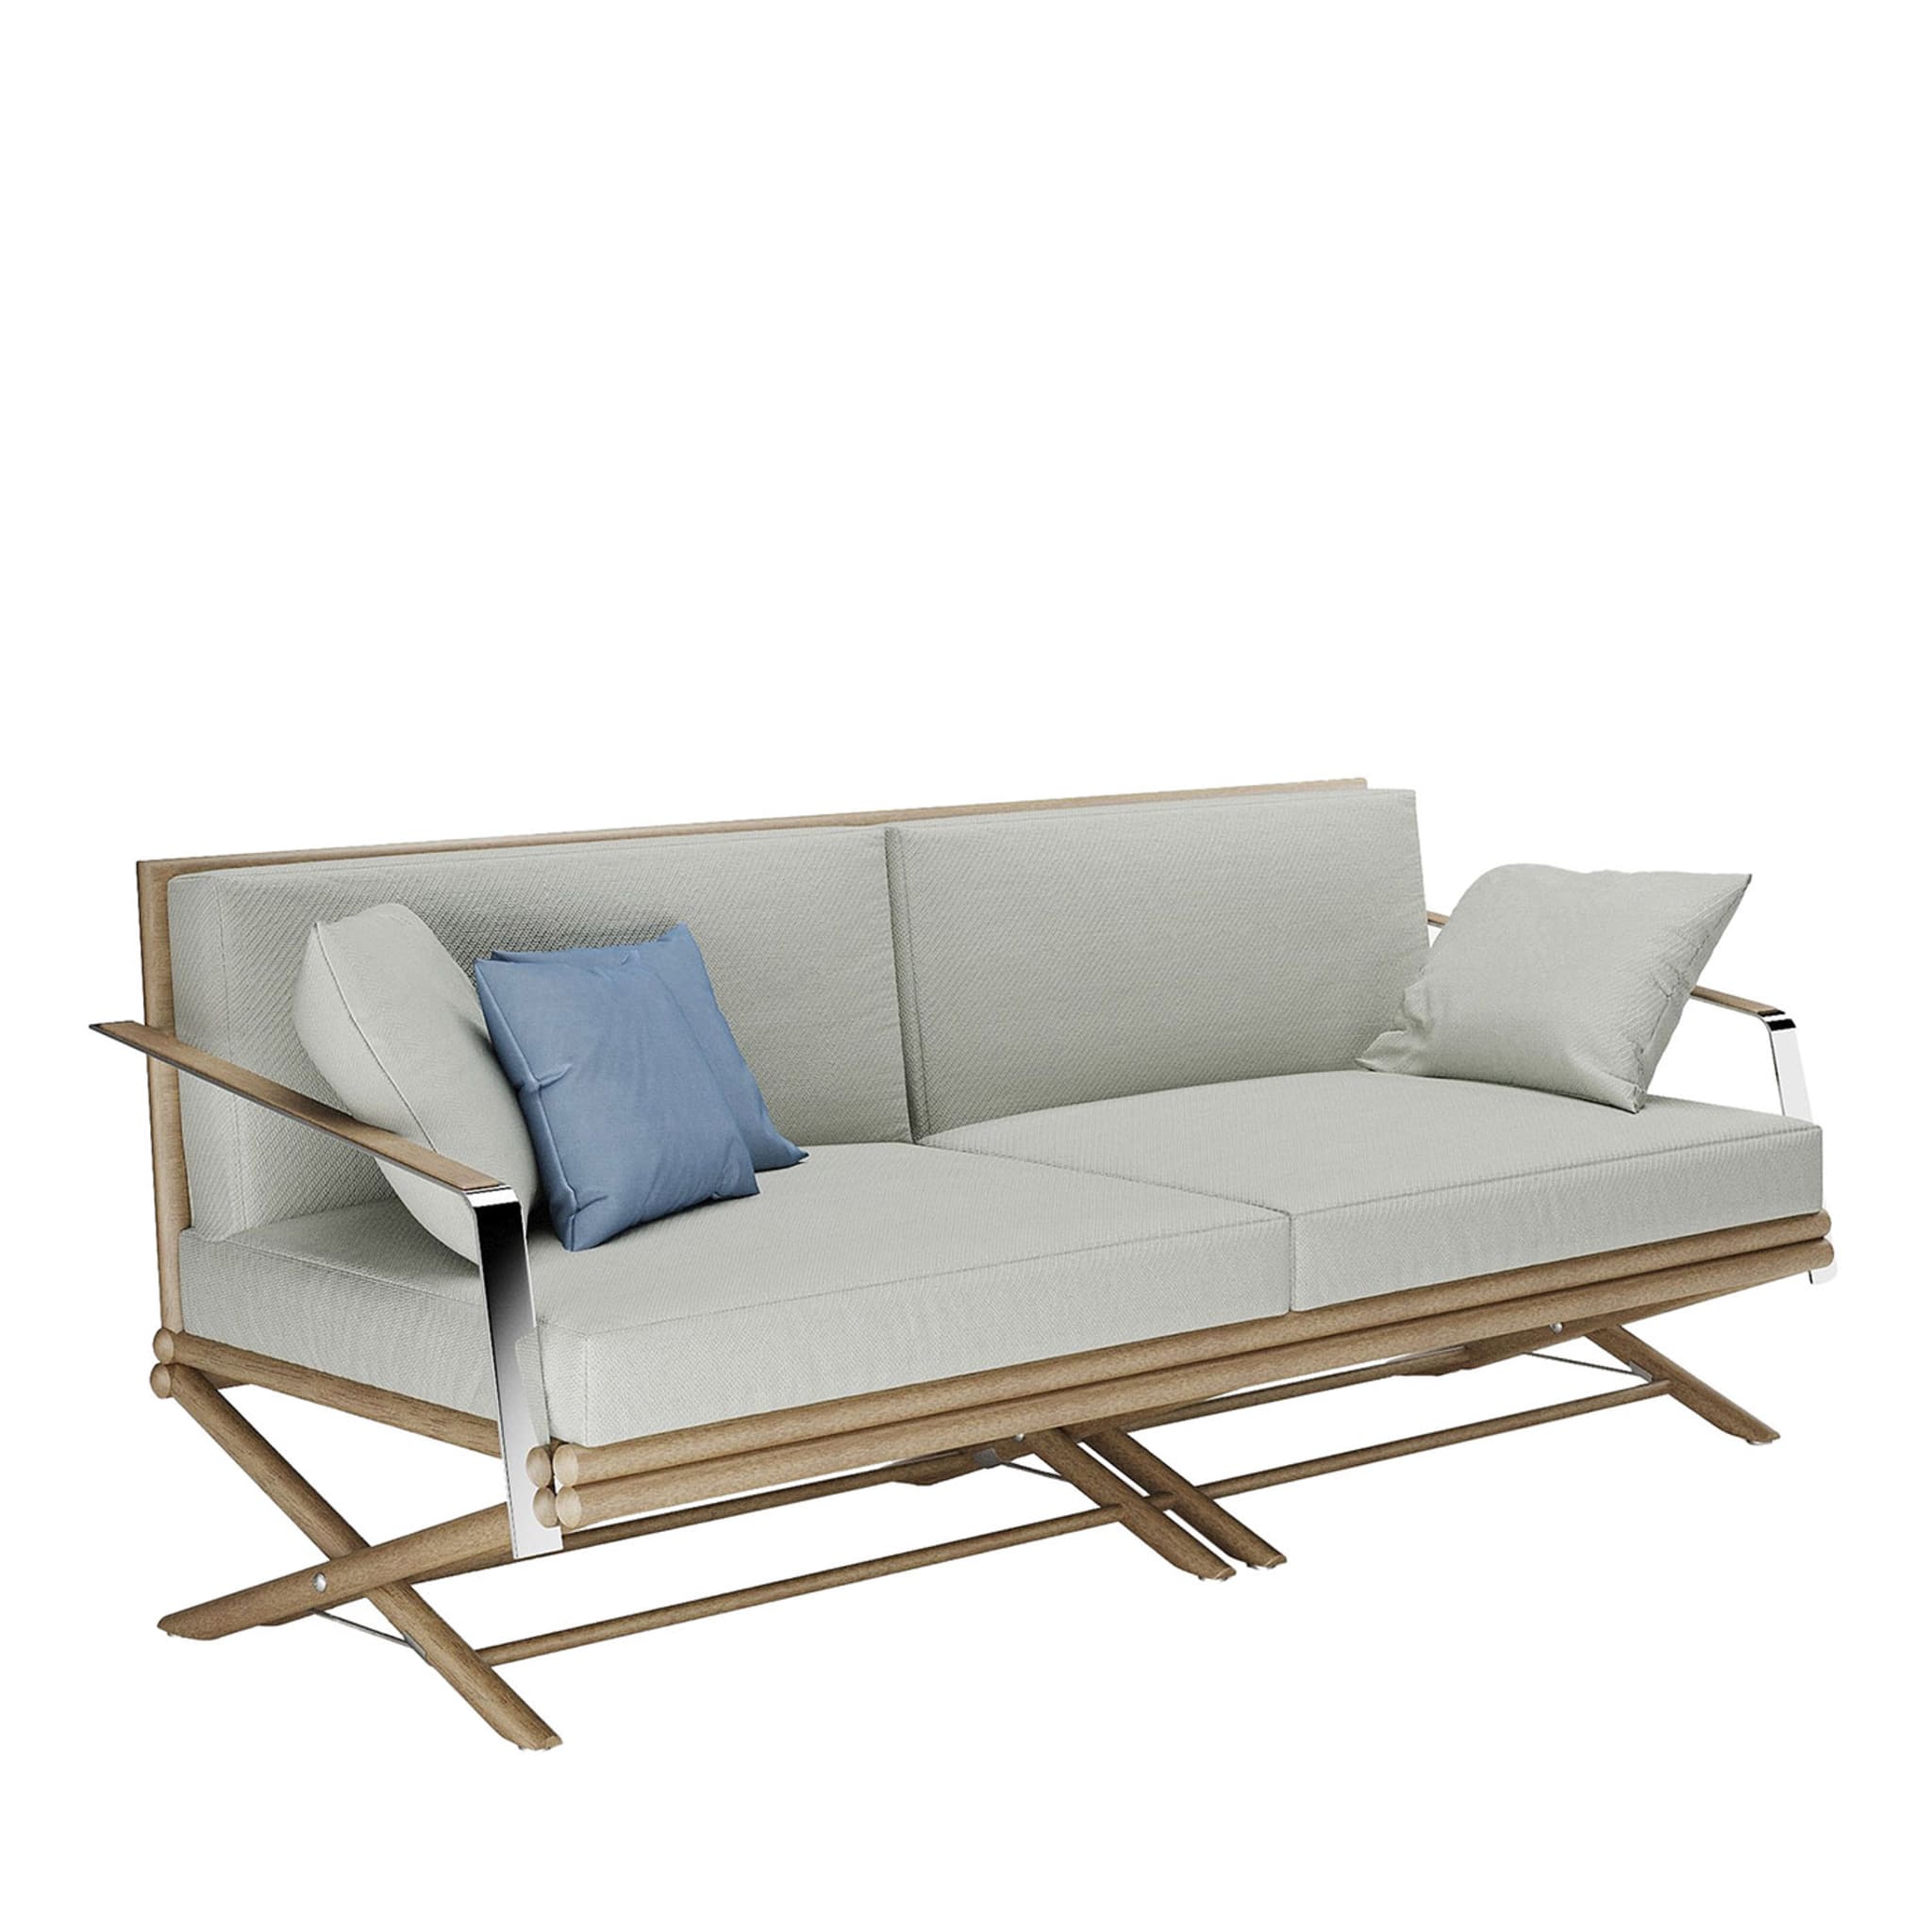 Maxim 2-sitziges sofa by Carlo Colombo - Hauptansicht